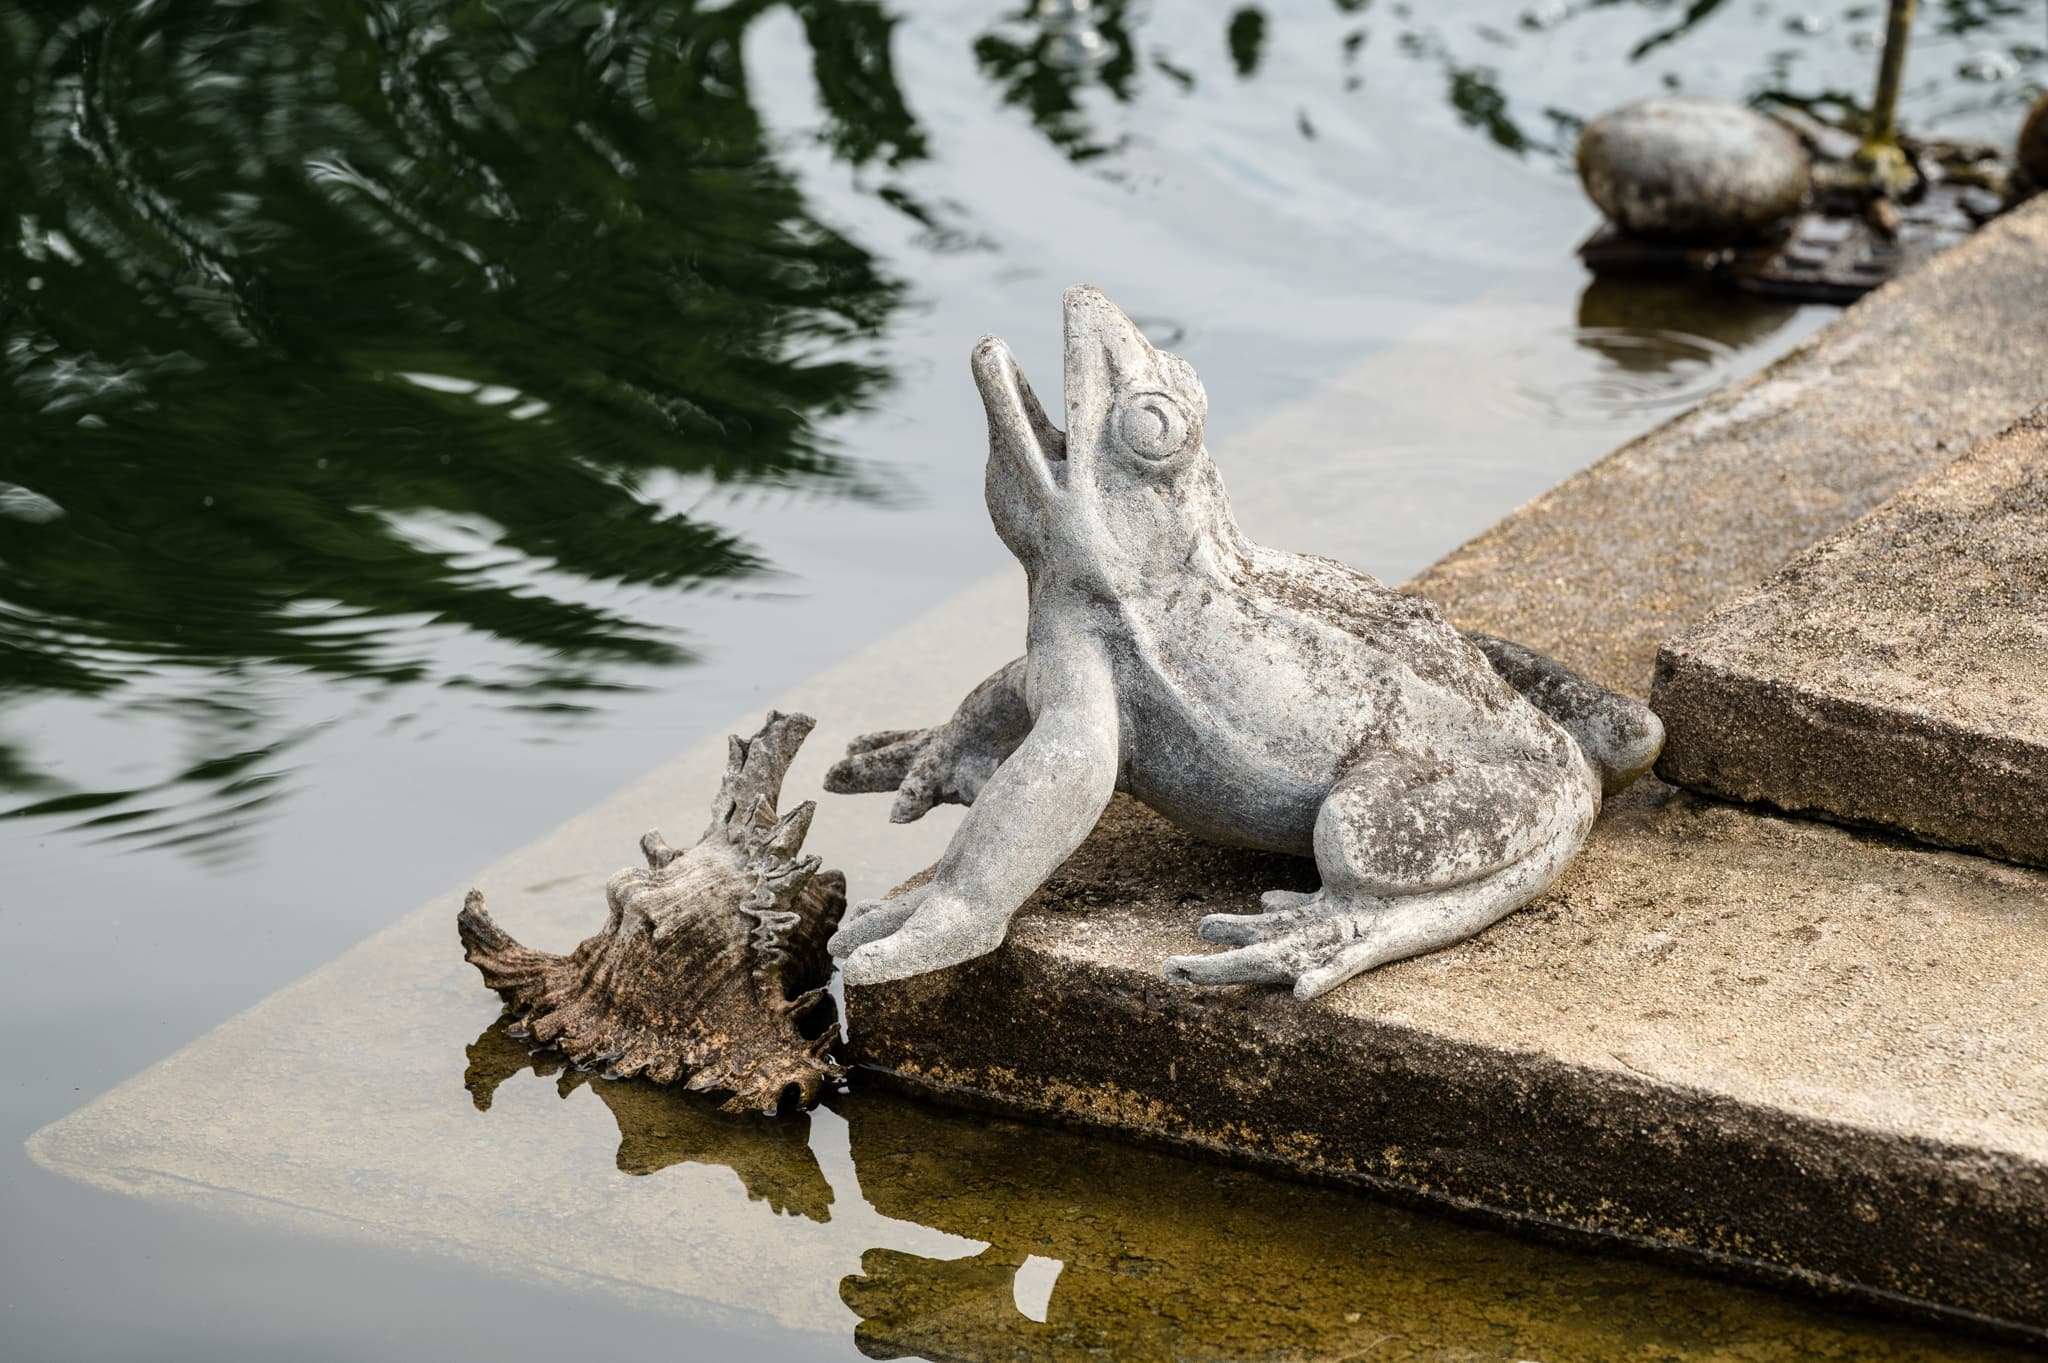 Frog and shell garden pond ornaments